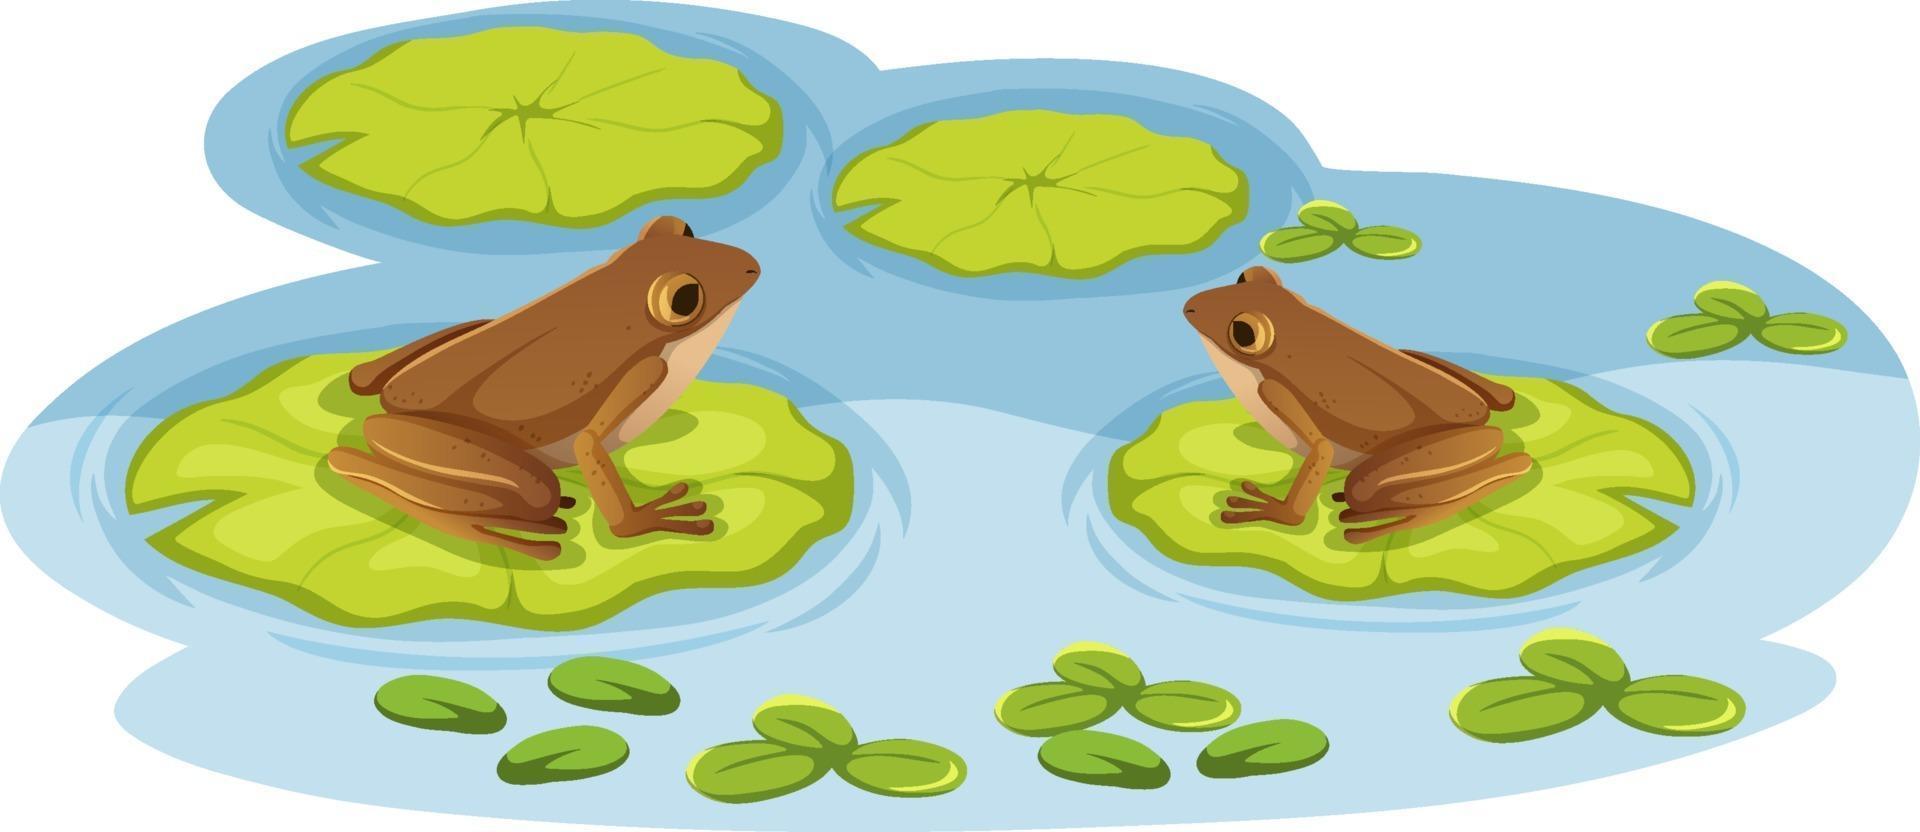 Two frogs on lotus leaves in the water vector